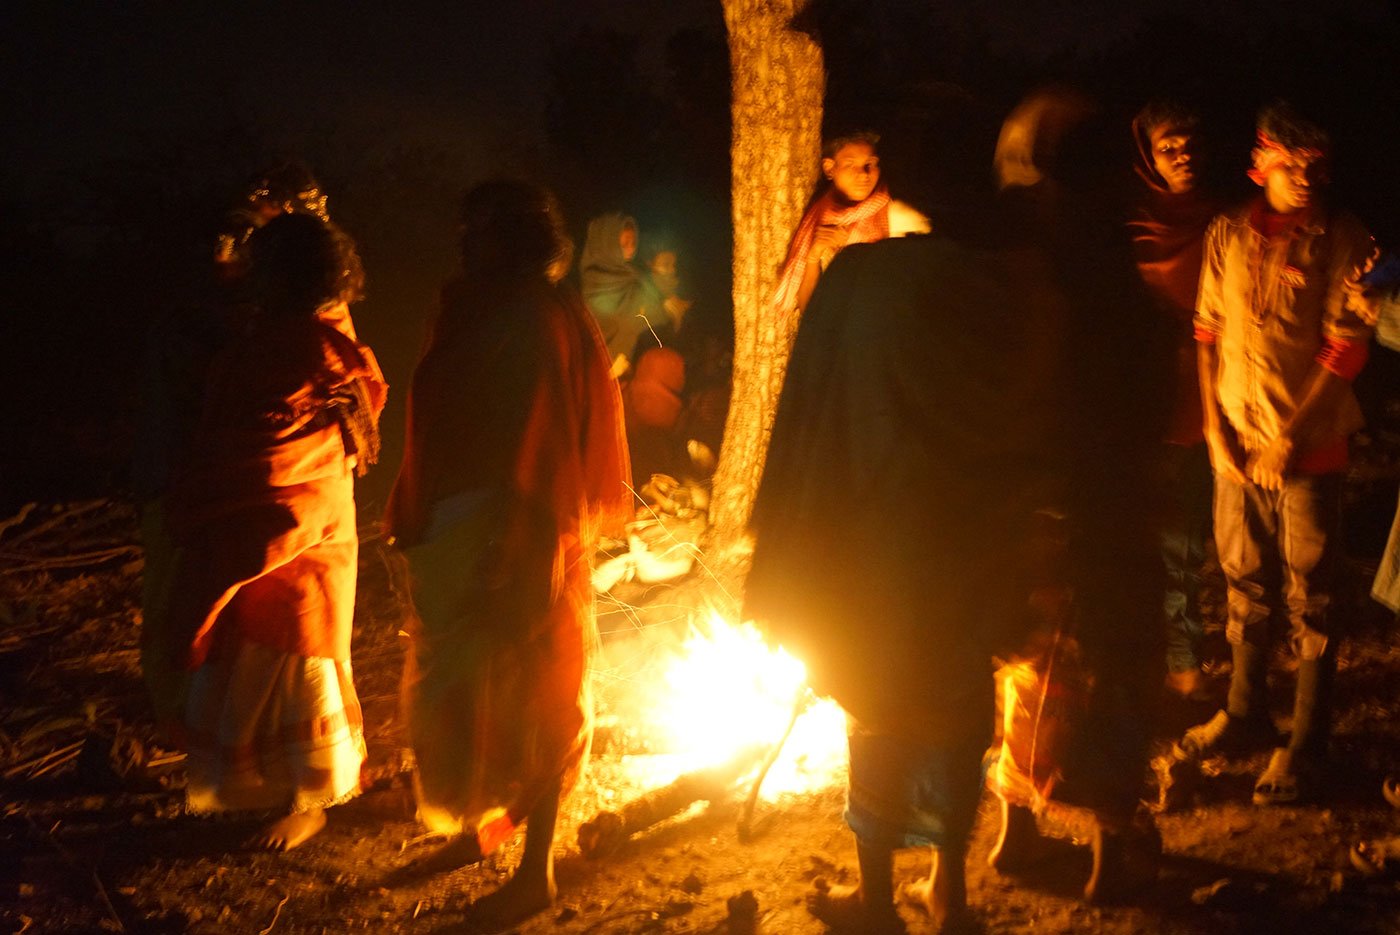 Tribals standing around a campfire at night